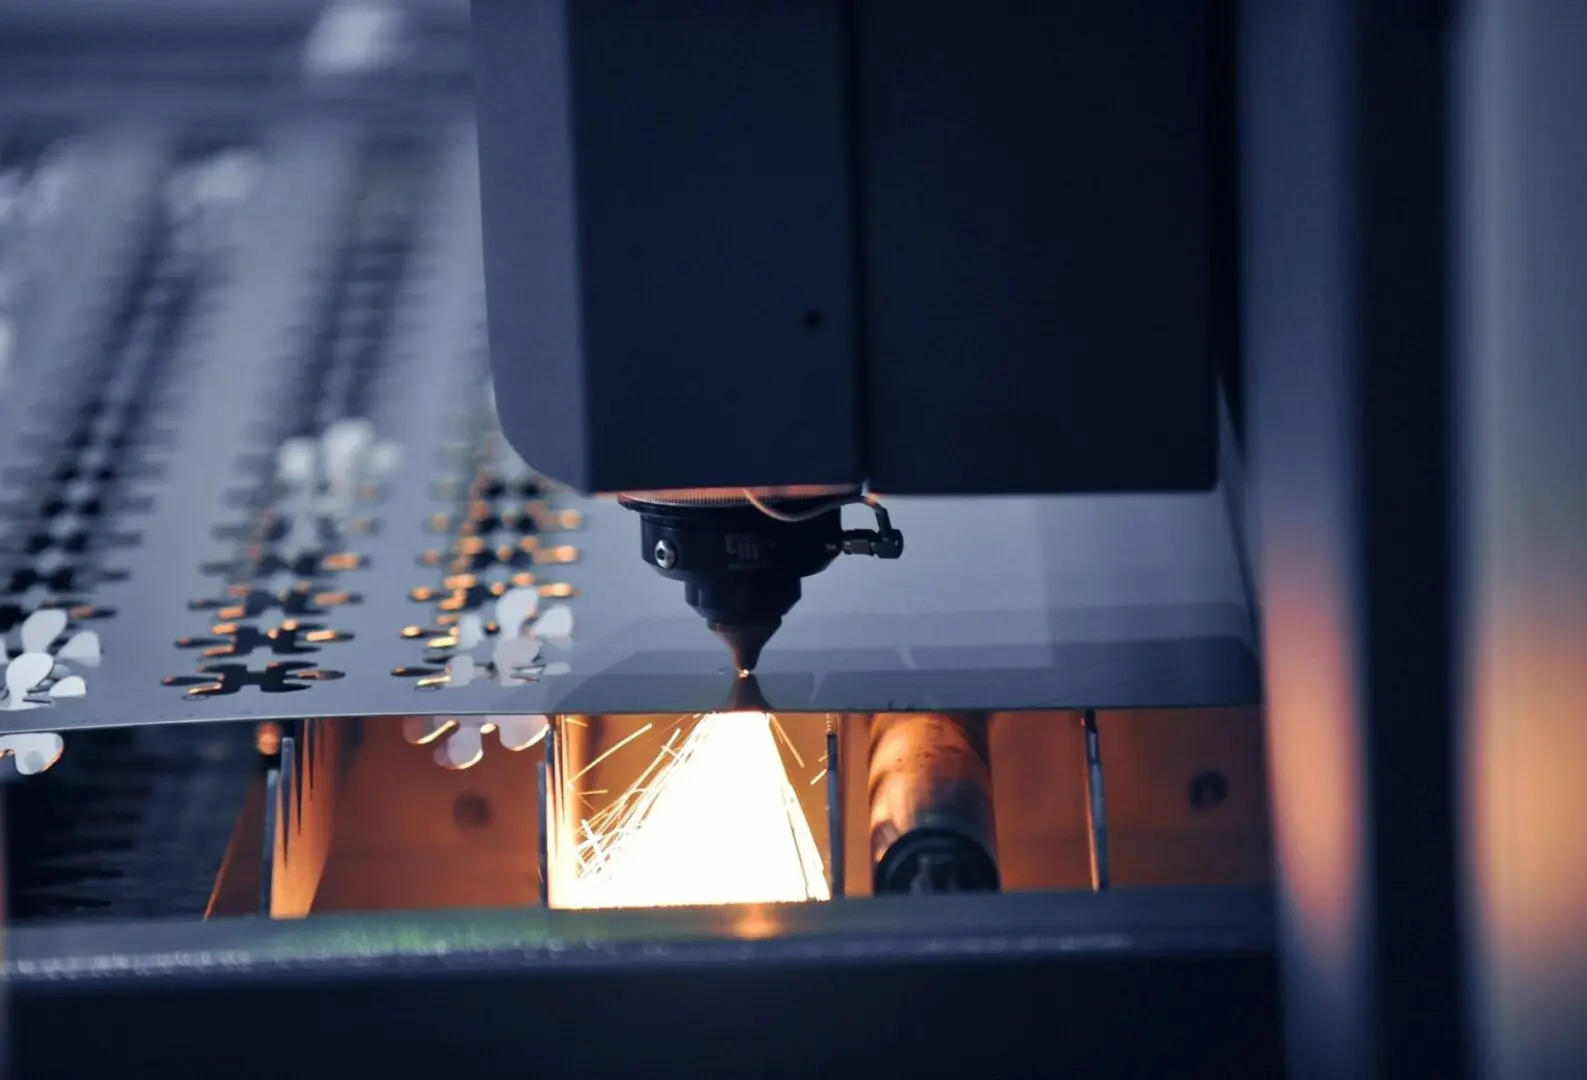 A machine is cutting metal with a flame.